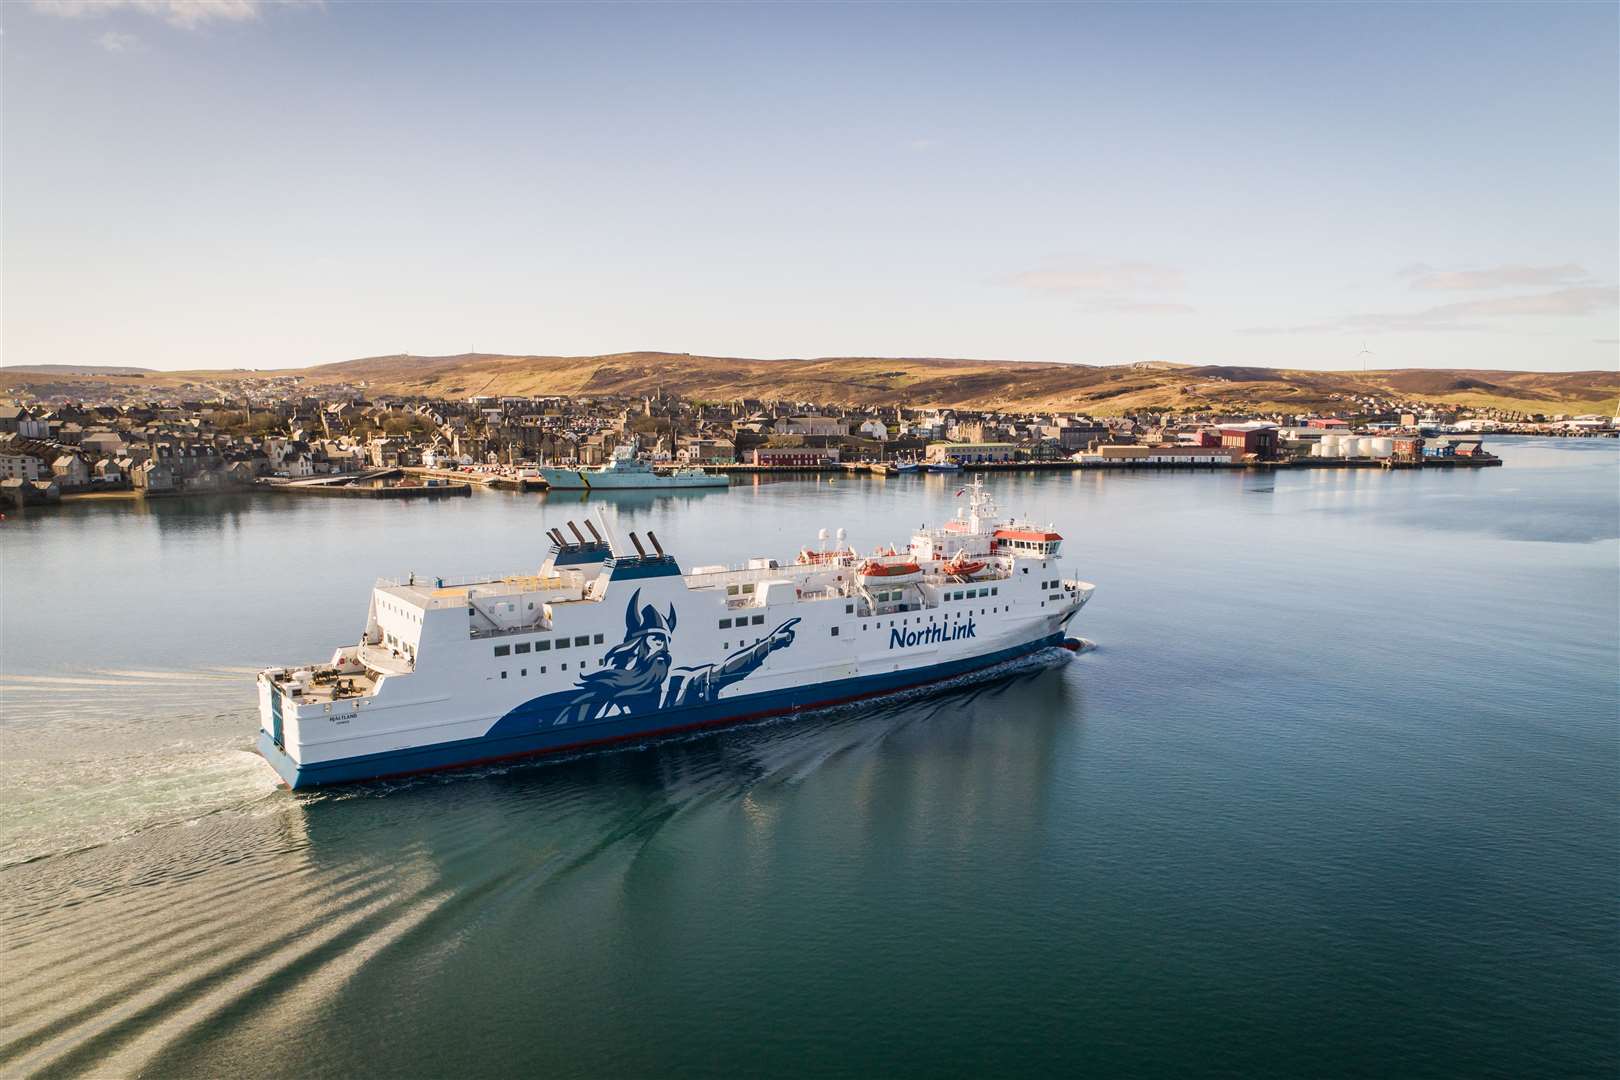 No replacement vessel to cover Scrabster route during Hamnavoe refit next month. Picture: NorthLink Ferries